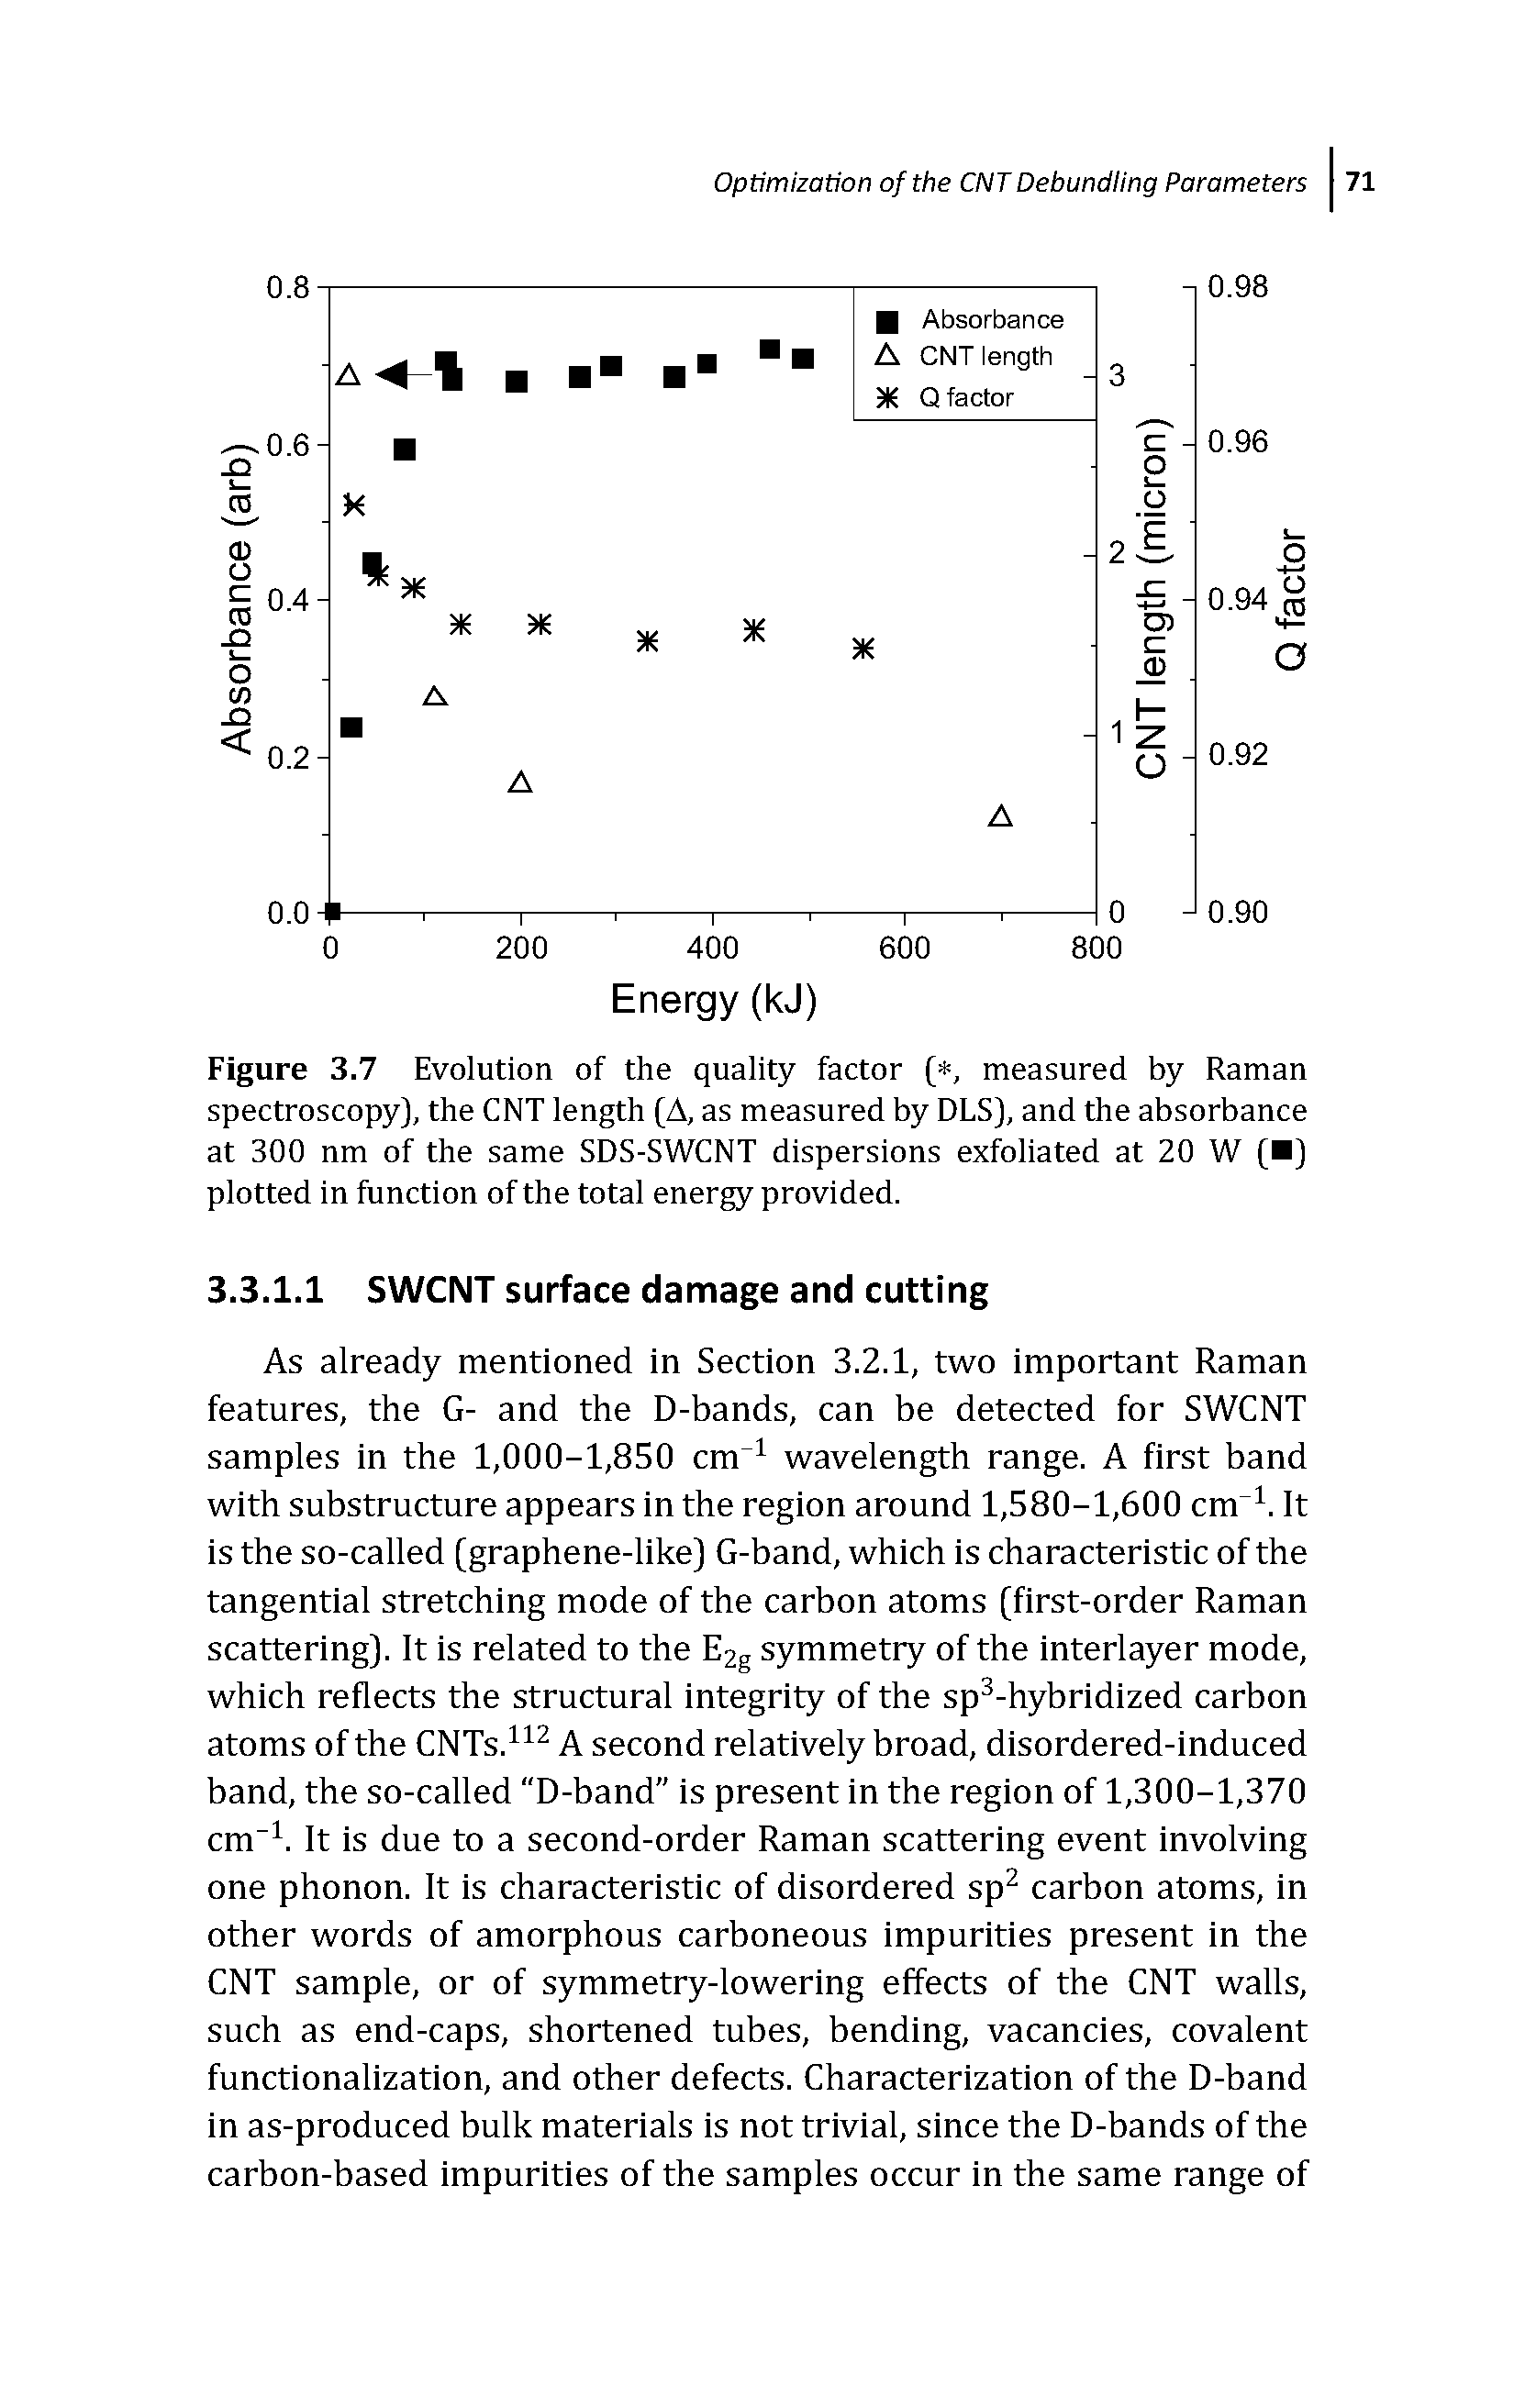 Figure 3.7 Evolution of the quality factor (, measured by Raman spectroscopy], the CNT length (A, as measured by DLS], and the absorbance at 300 nm of the same SDS-SWCNT dispersions exfoliated at 20 W ( ] plotted in function of the total energy provided.